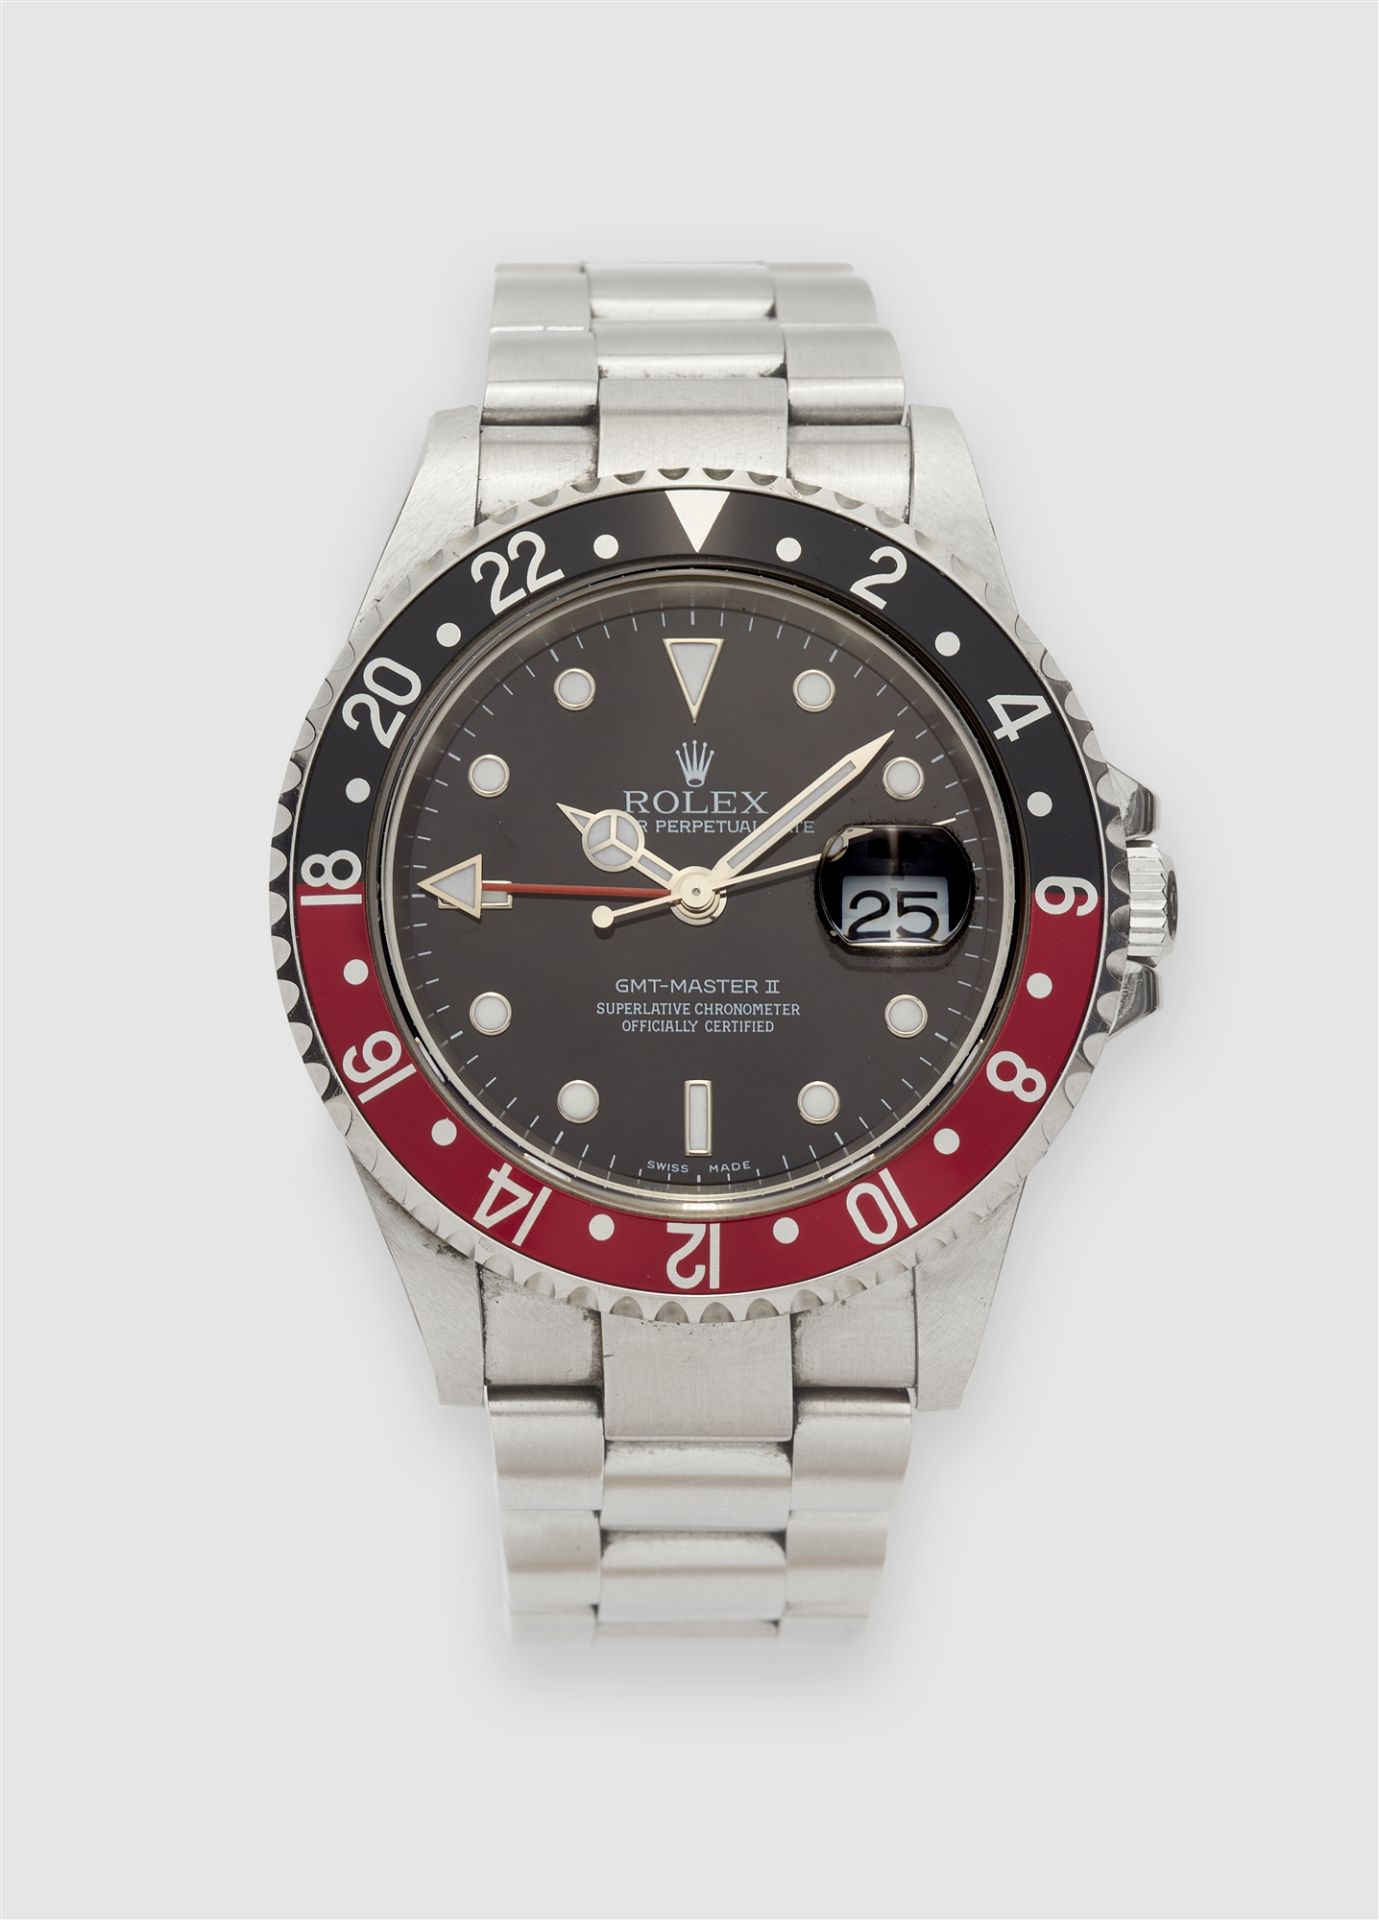 A stainless steel automatic Rolex GMT Master II "Coke" wristwatch ref. 16710.